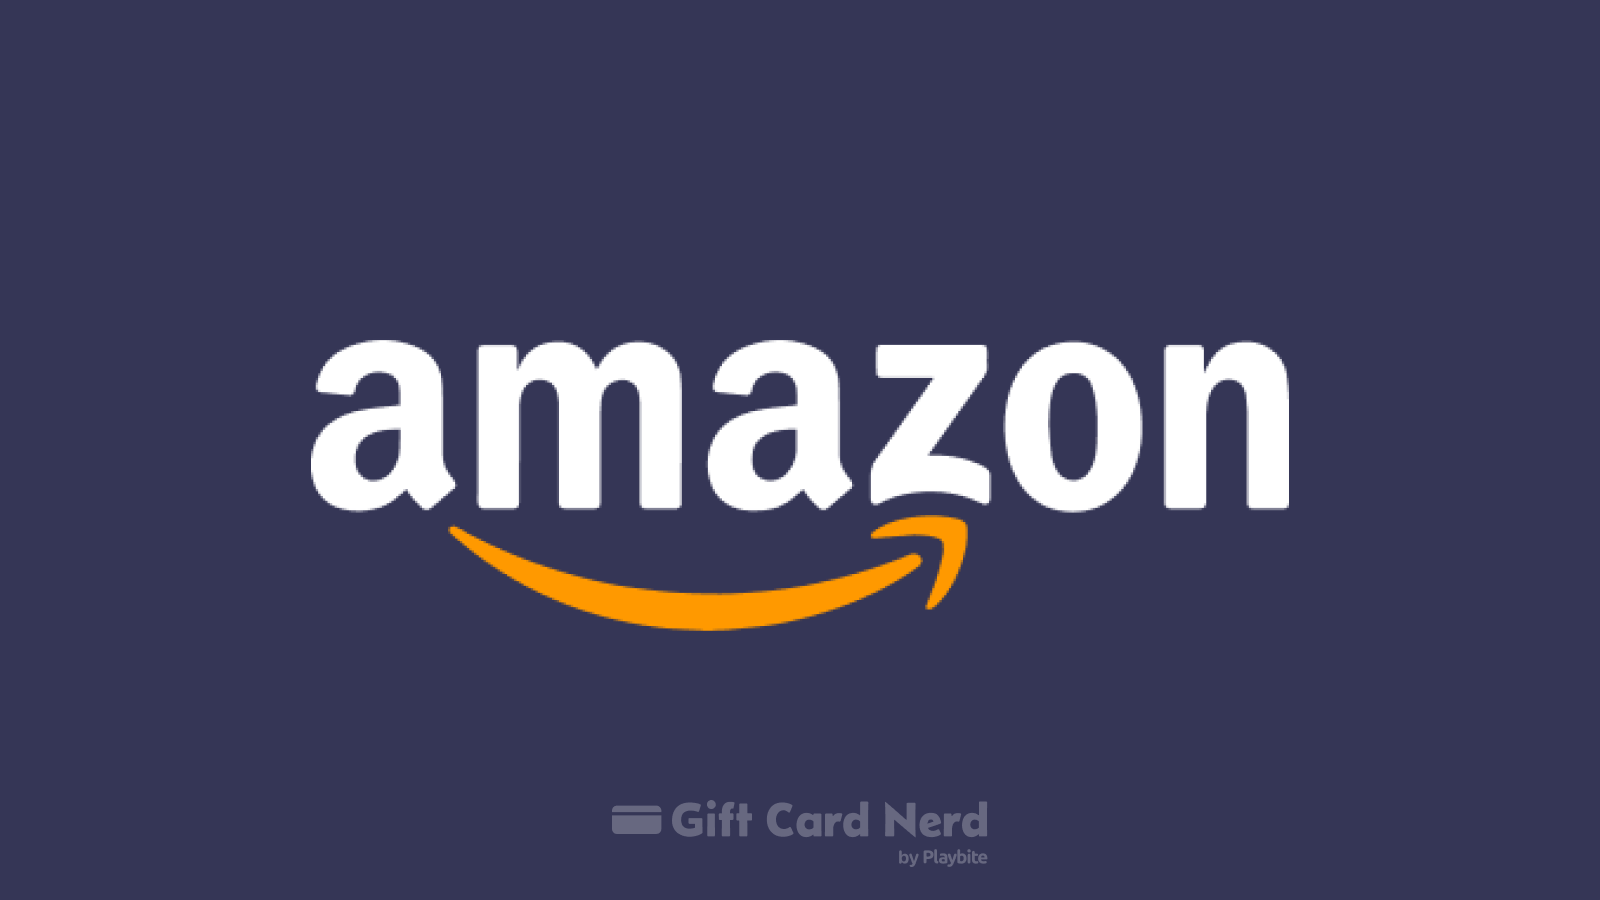 Can I Use an Amazon Gift Card on Roblox?